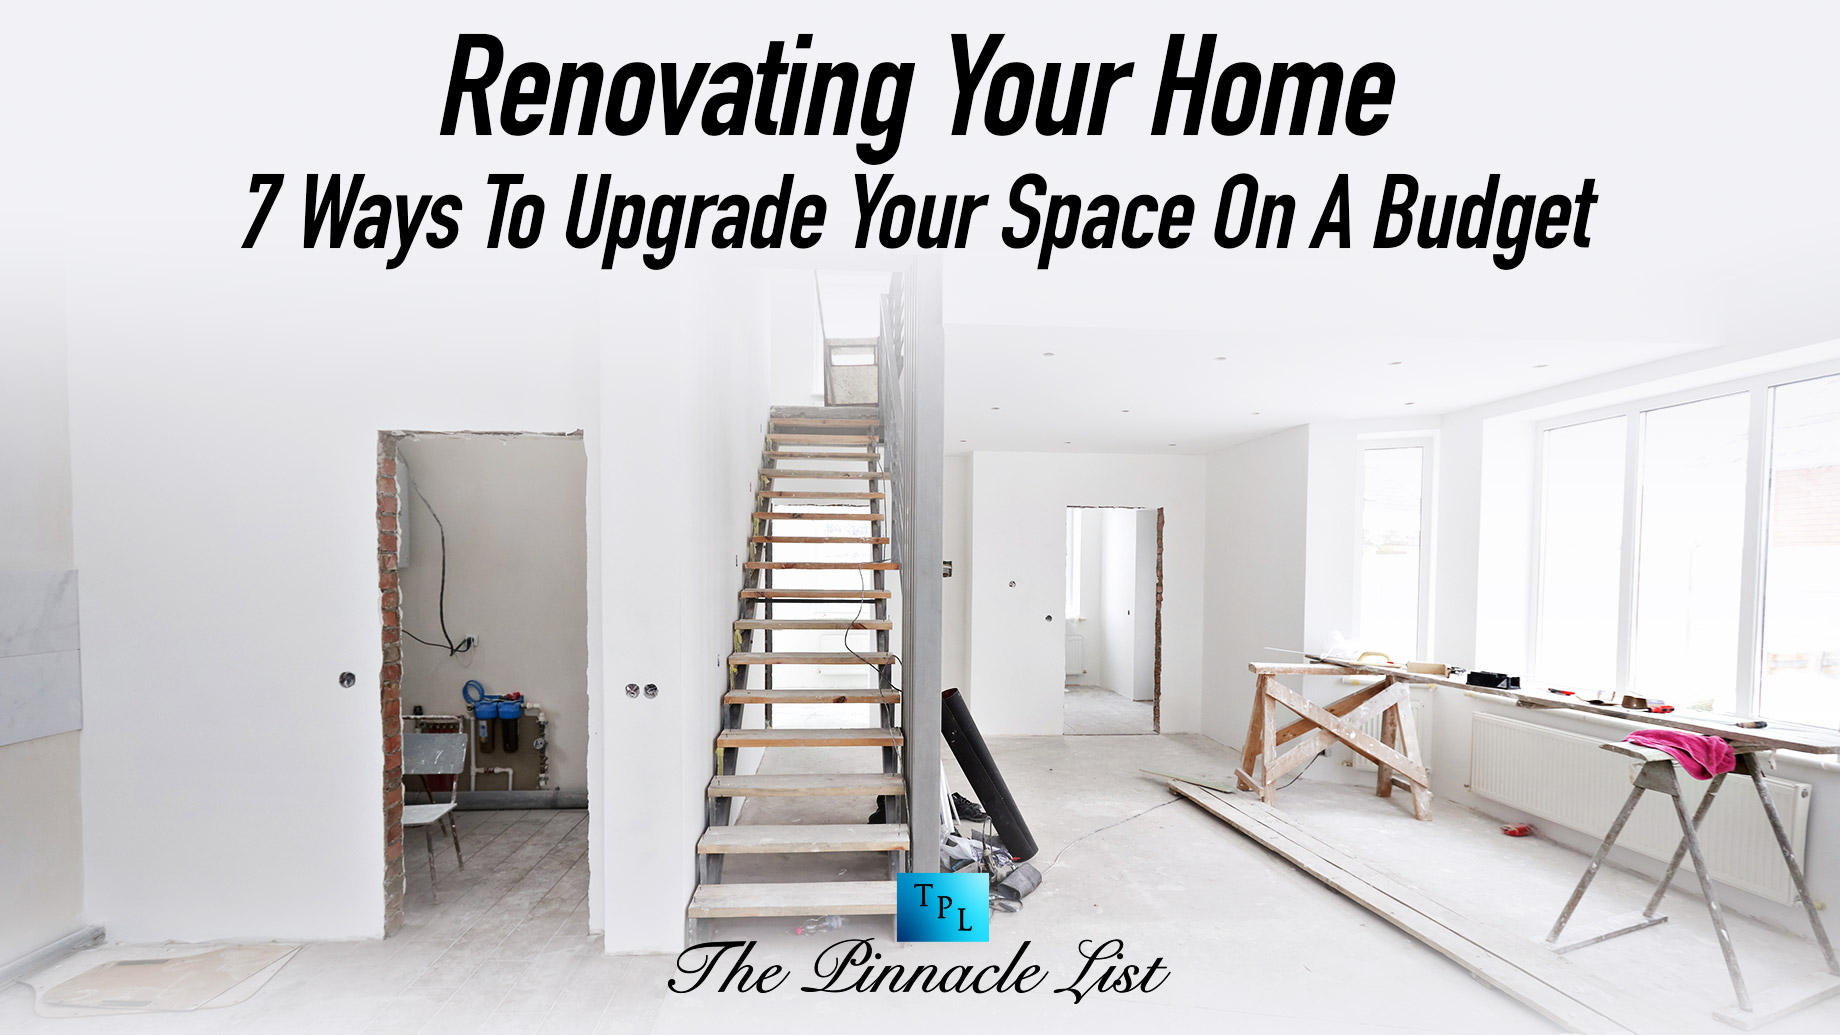 Renovating Your Home: 7 Ways To Upgrade Your Space On A Budget